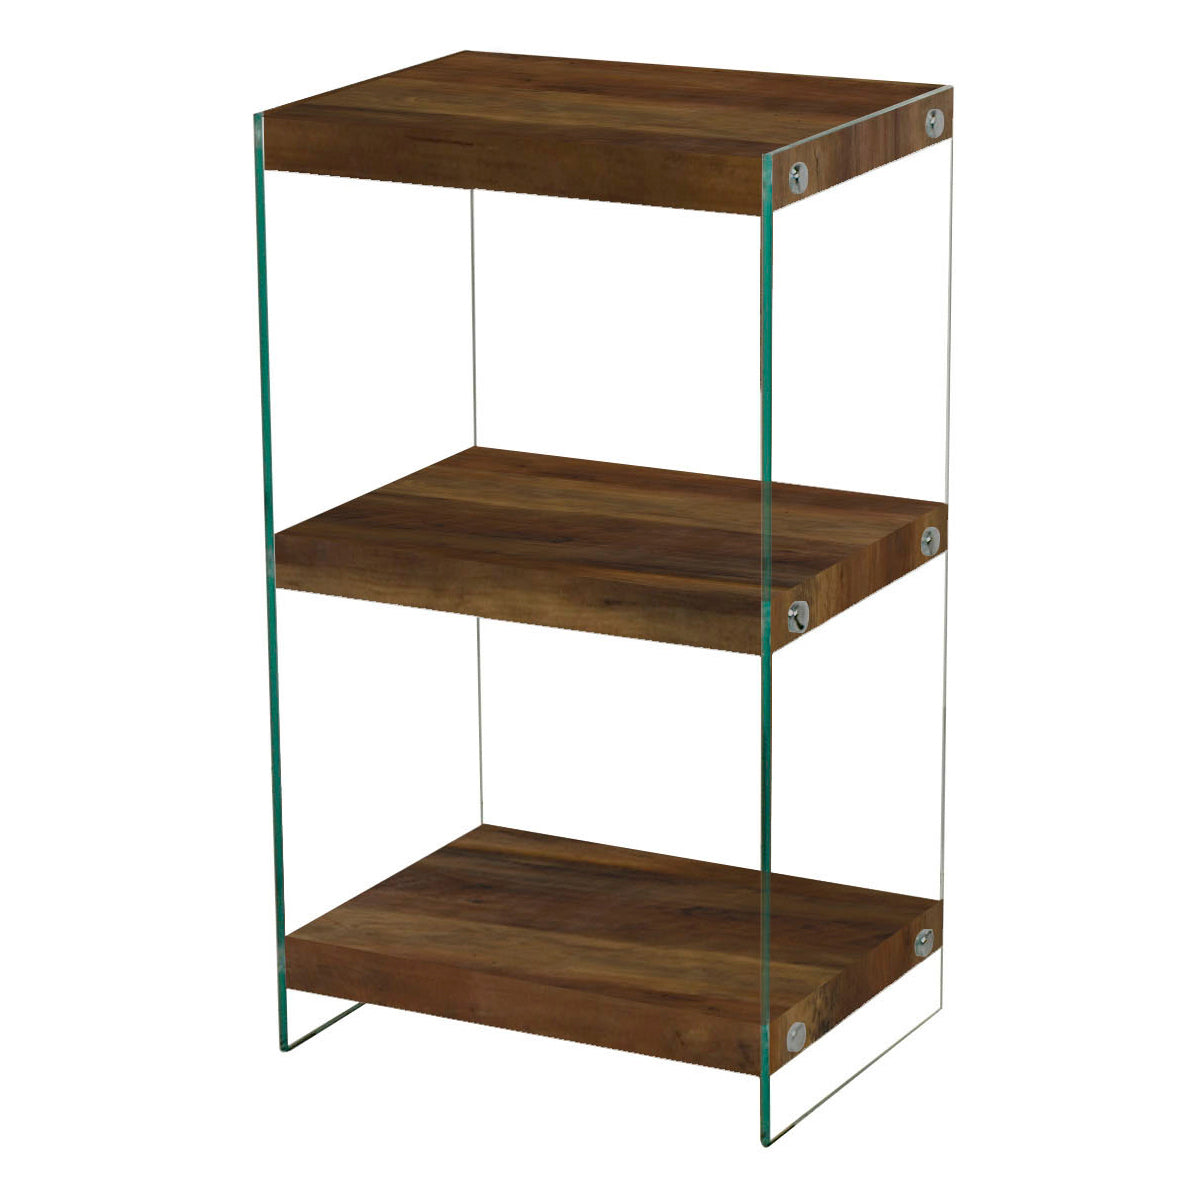 Charter Small Storage Unit Oak Effect And Glass Sides